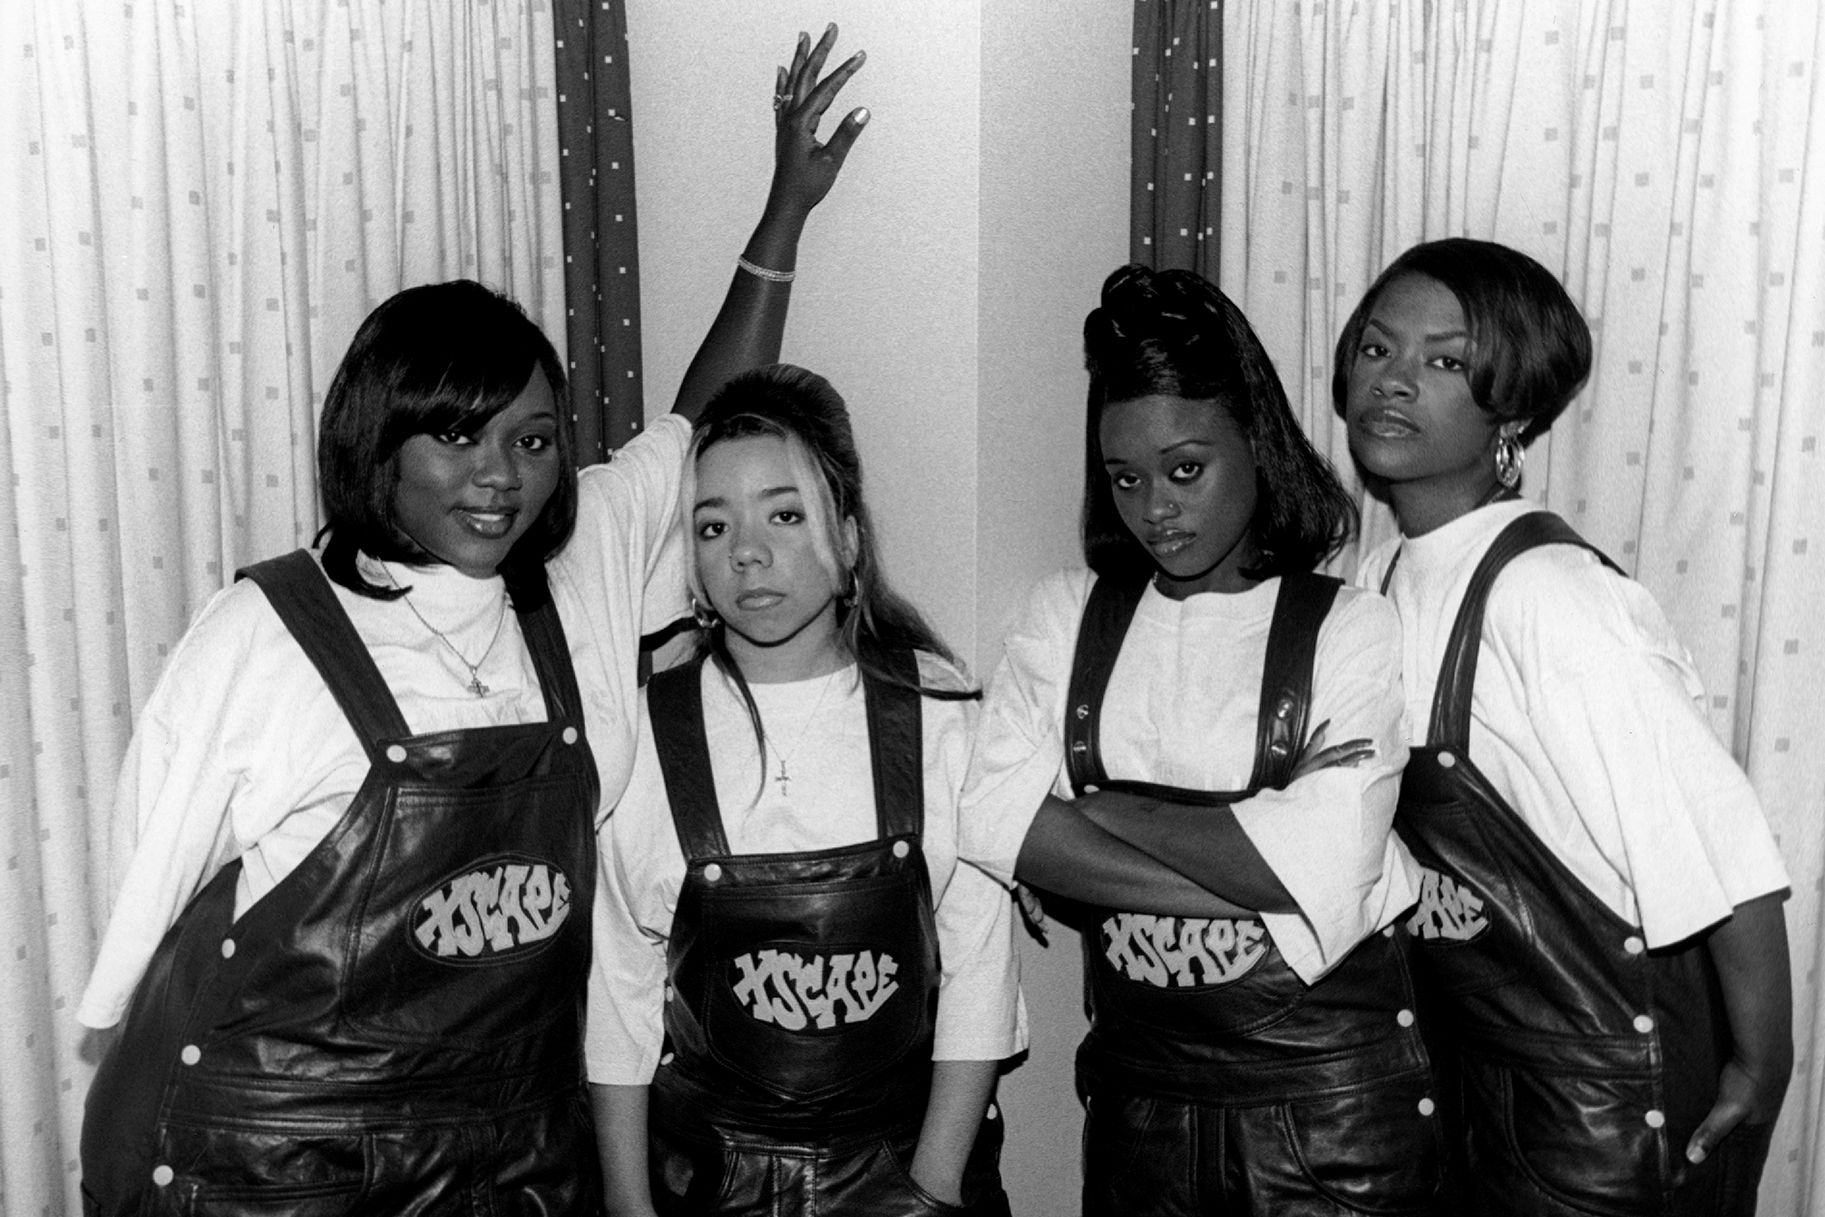 Real Housewives of Atlanta Kandi Burruss Throwback Photo Xscape. The Daily Dish